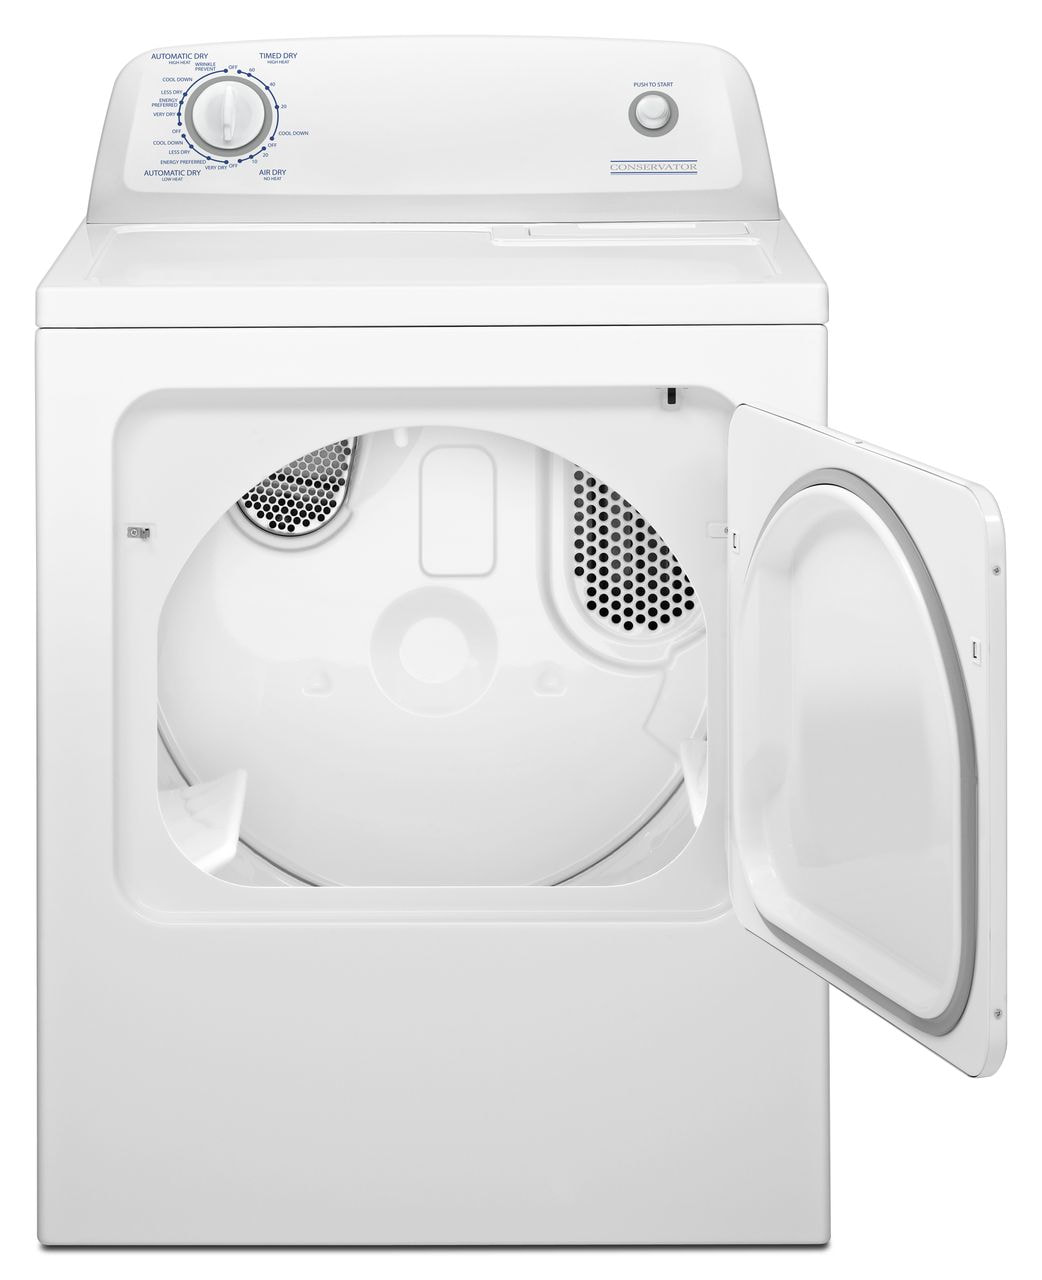 LG - 27 in. 4.8 cu. ft. Mega Capacity White Top Load Washer